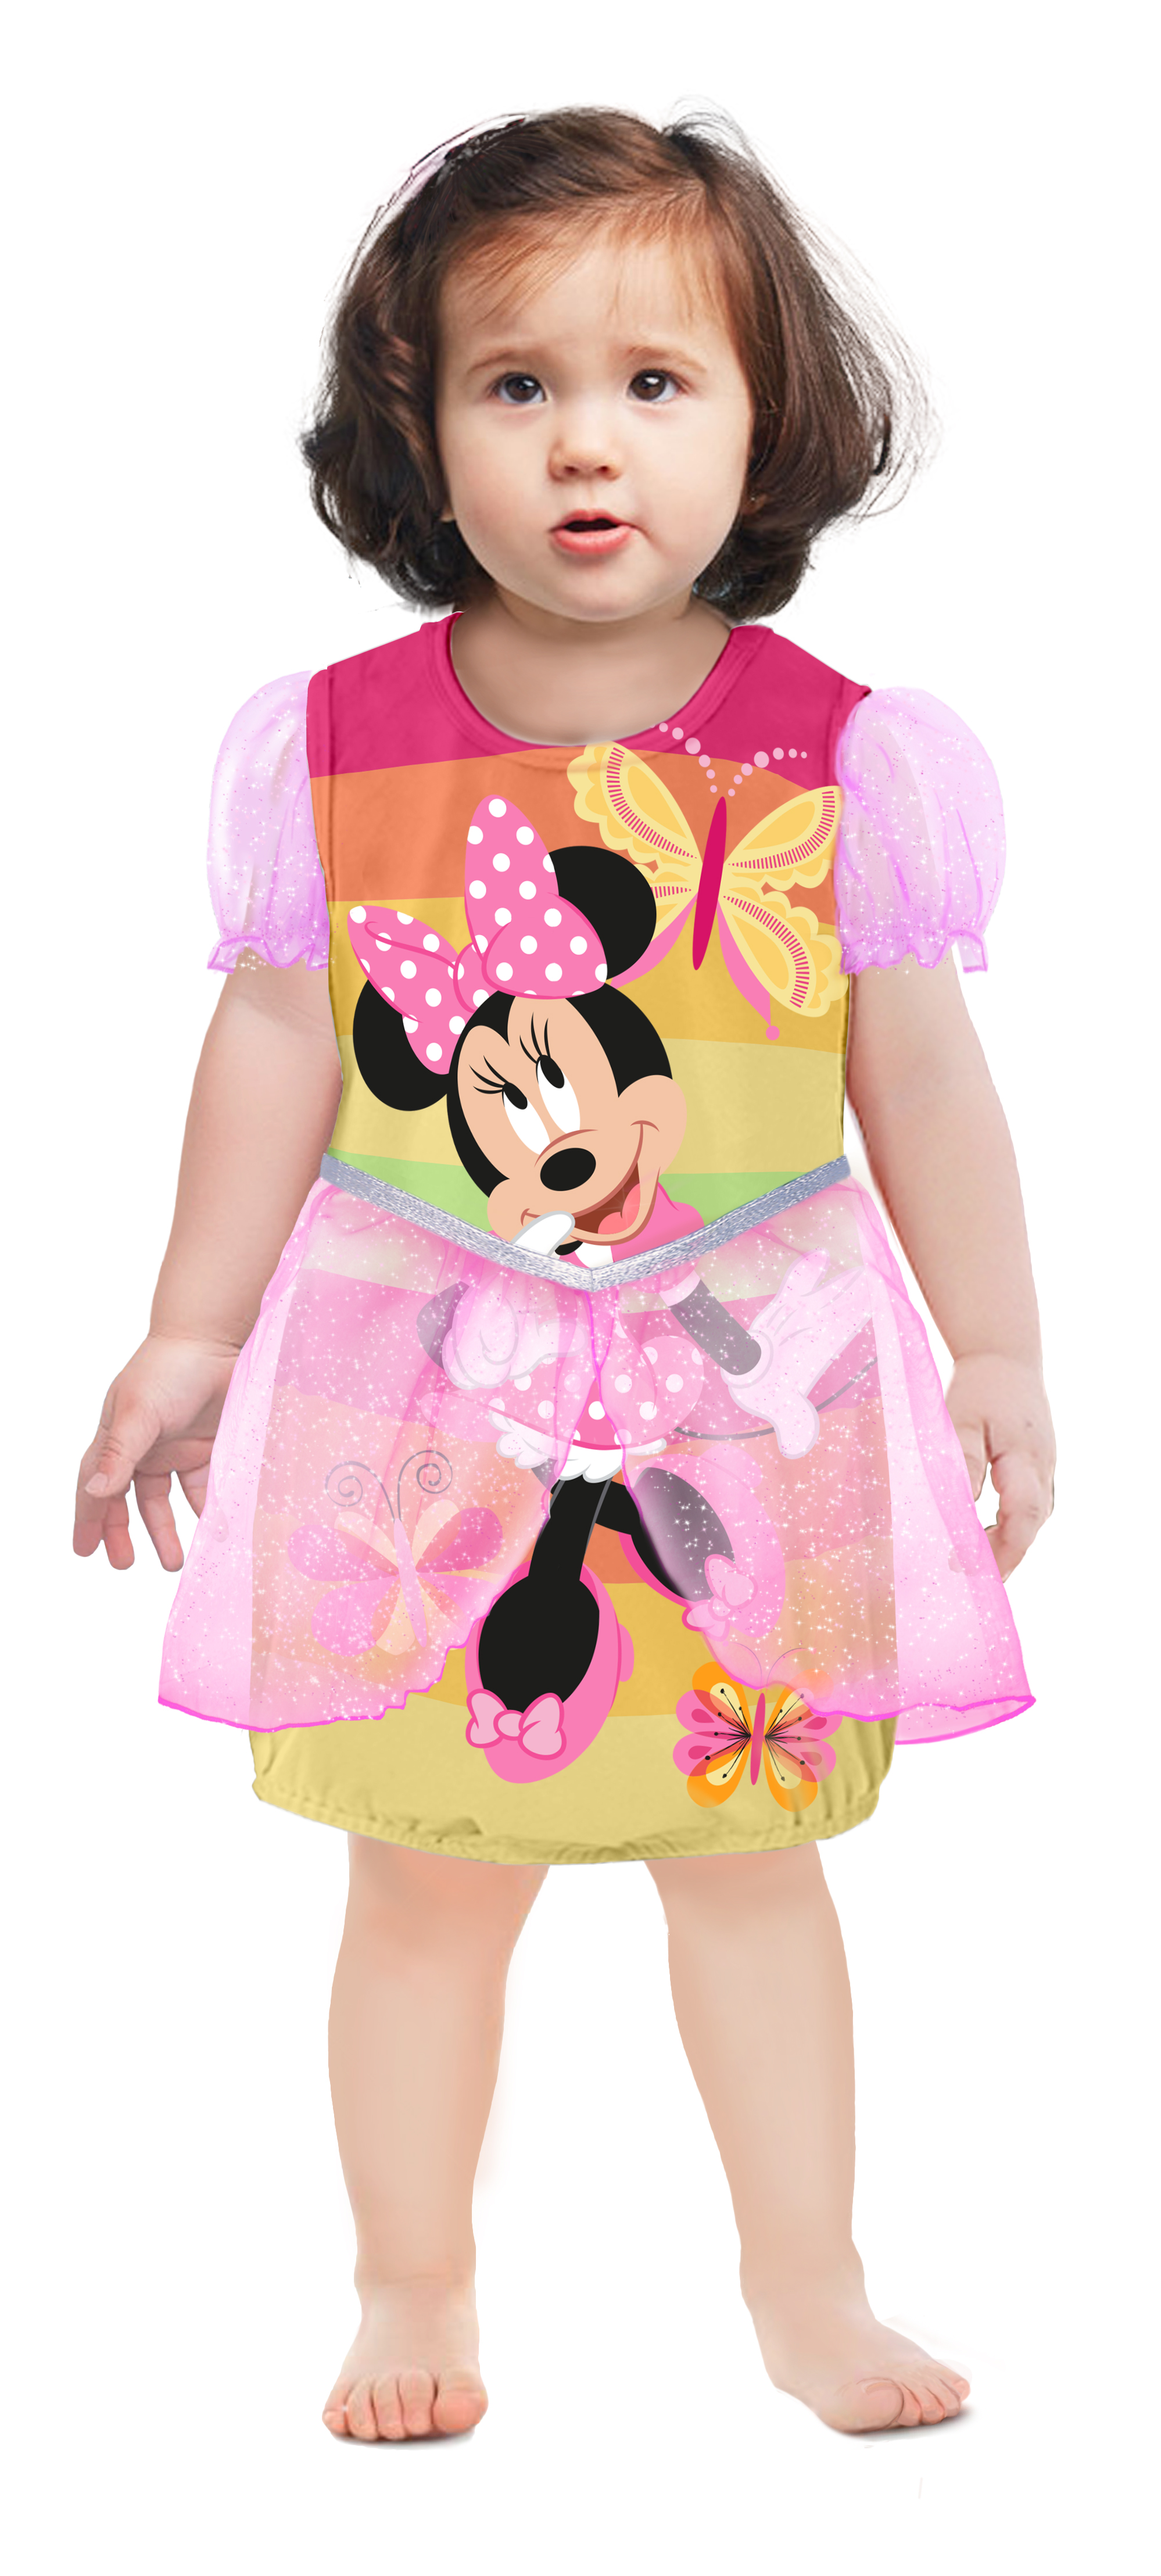 Ciao - Baby Costume - Minnie Mouse Pink (68 cm) (11248.12-18)